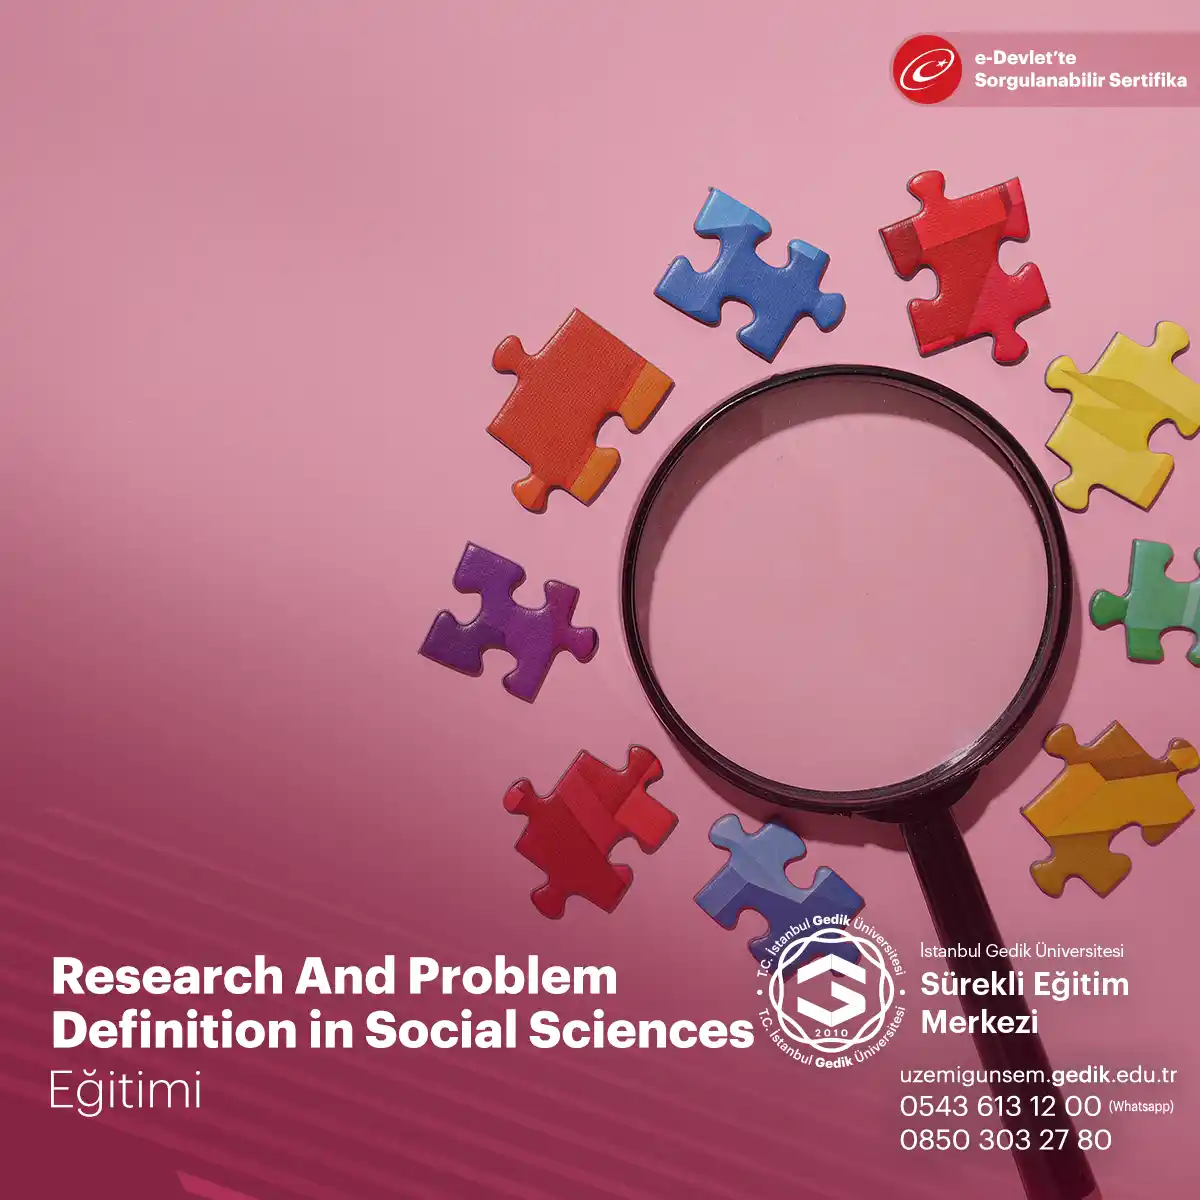 Research And Problem Definition in Social Sciences